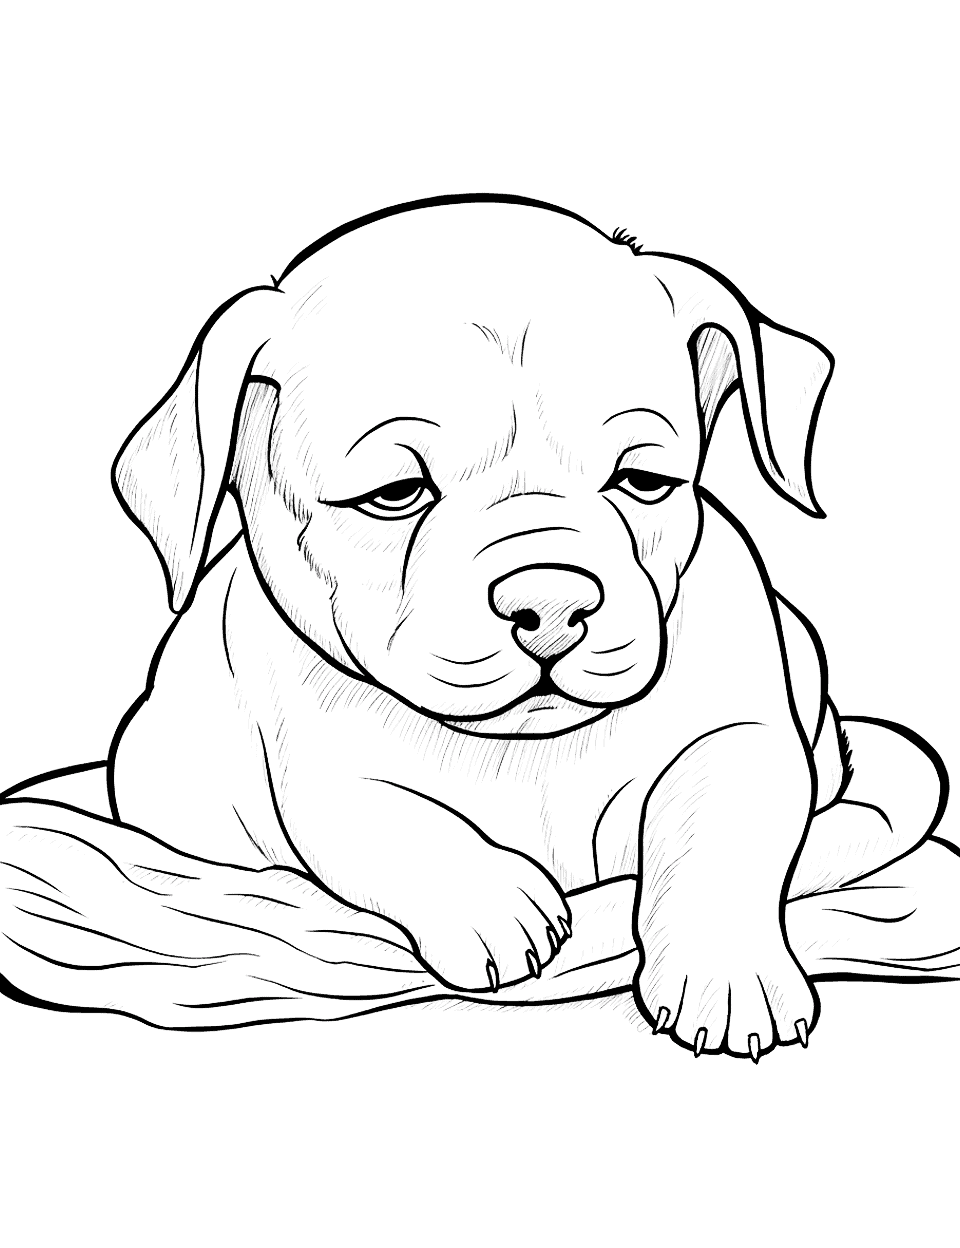 Sleepy Time Bulldog Puppy Napping Coloring Page - A Bulldog puppy taking a nap on a soft pillow.